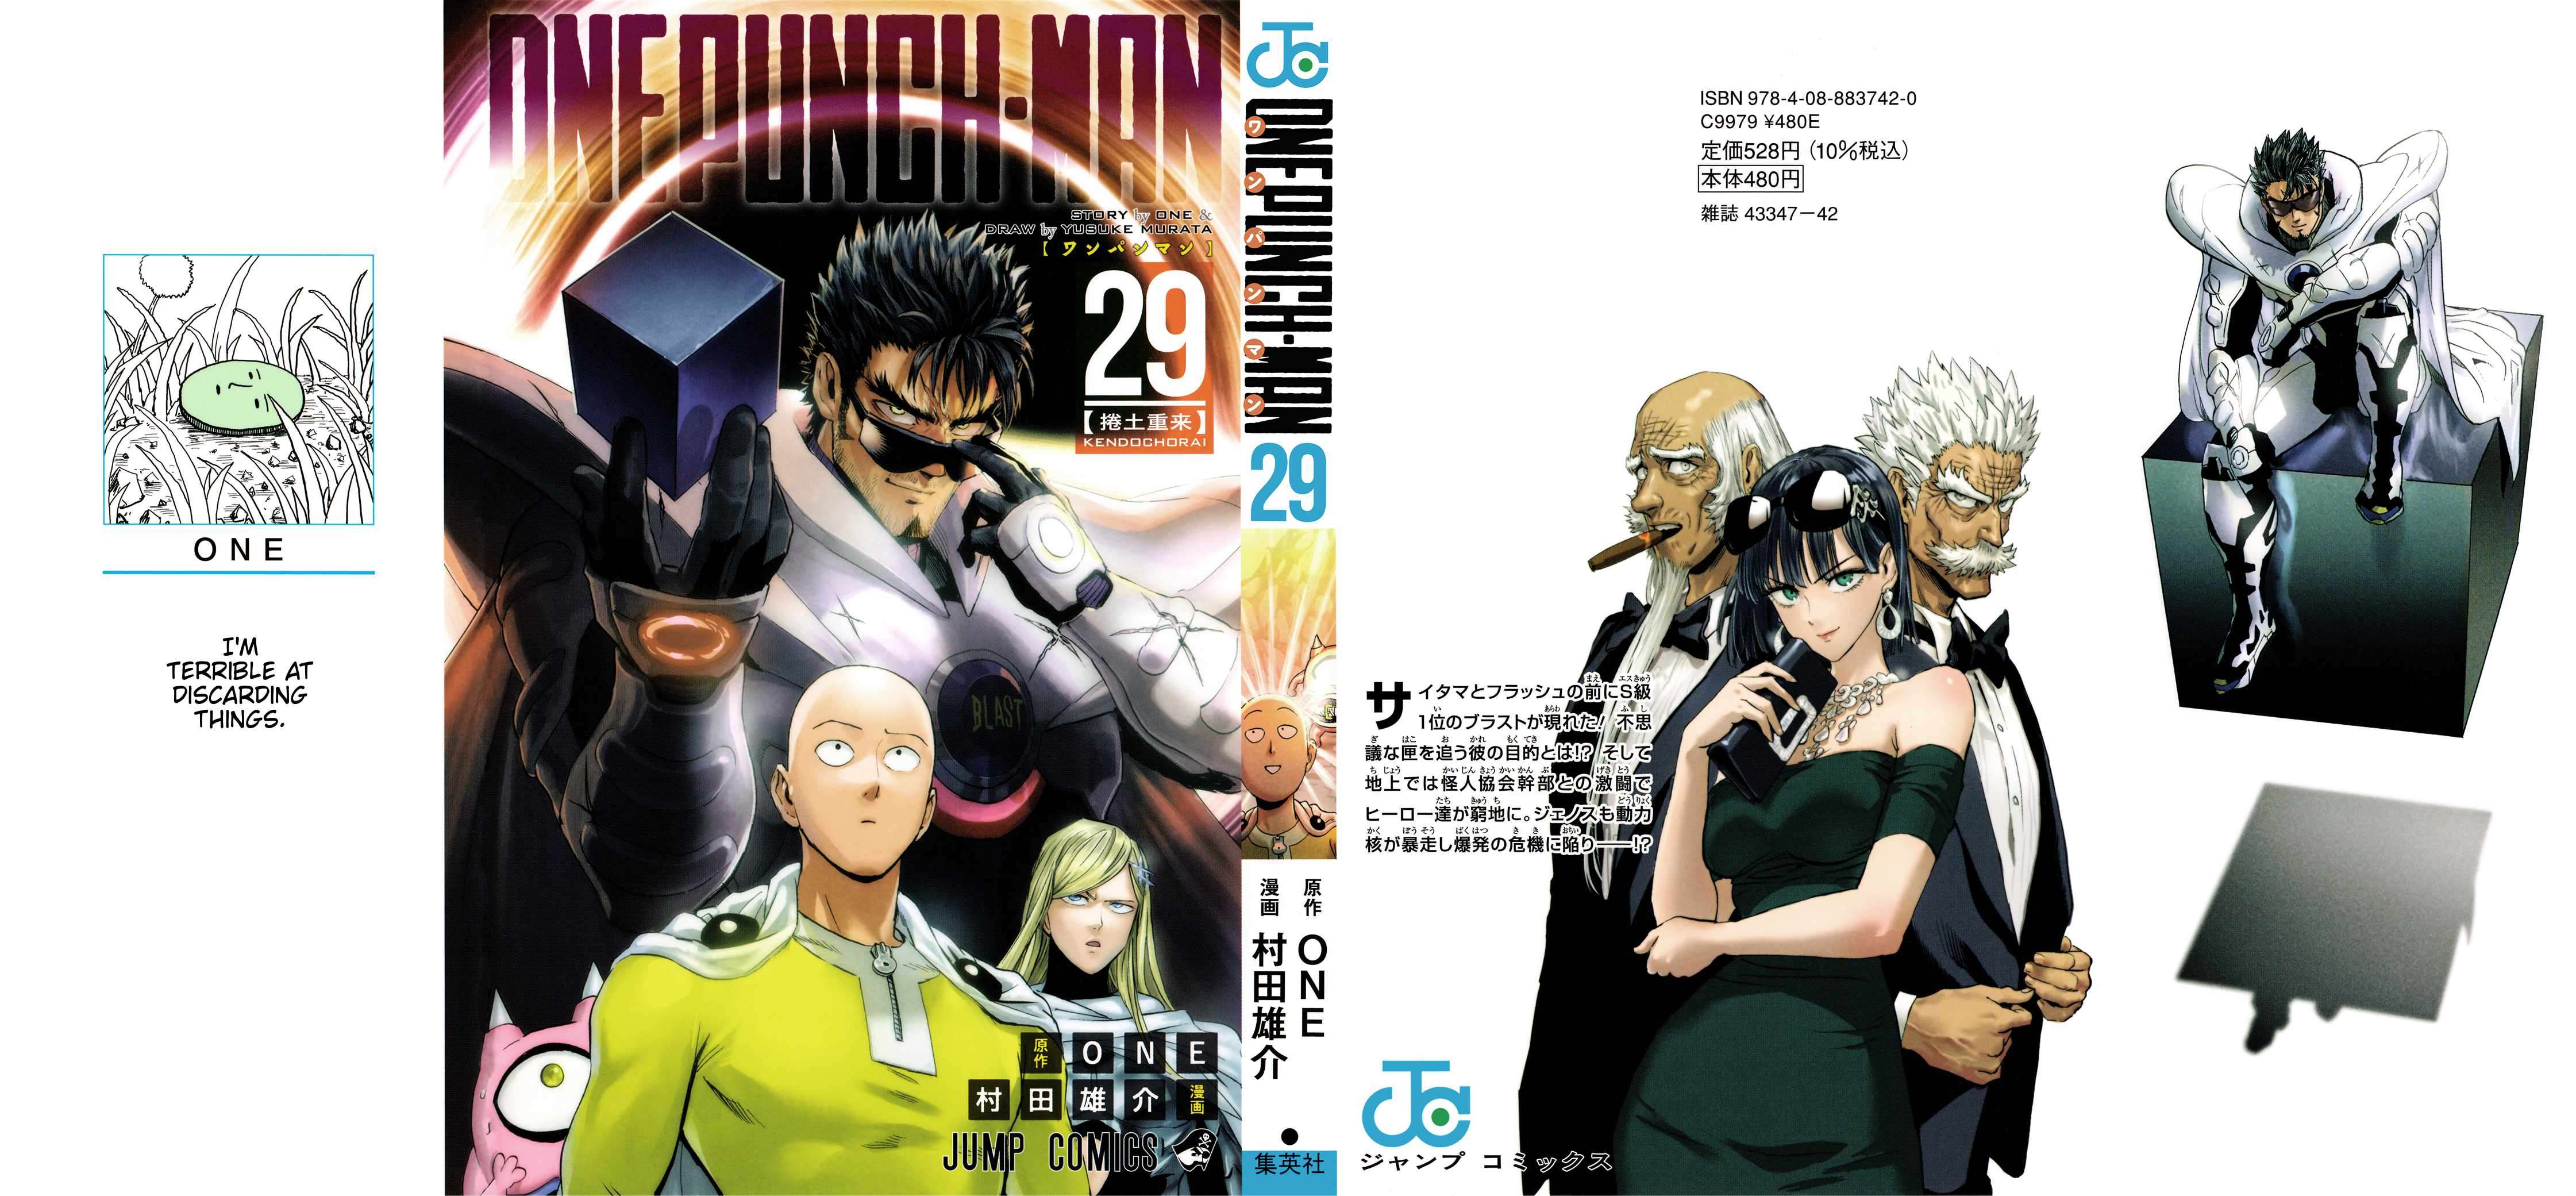 One-Punch Man Chapter 55.7 - One Punch Man Manga Online